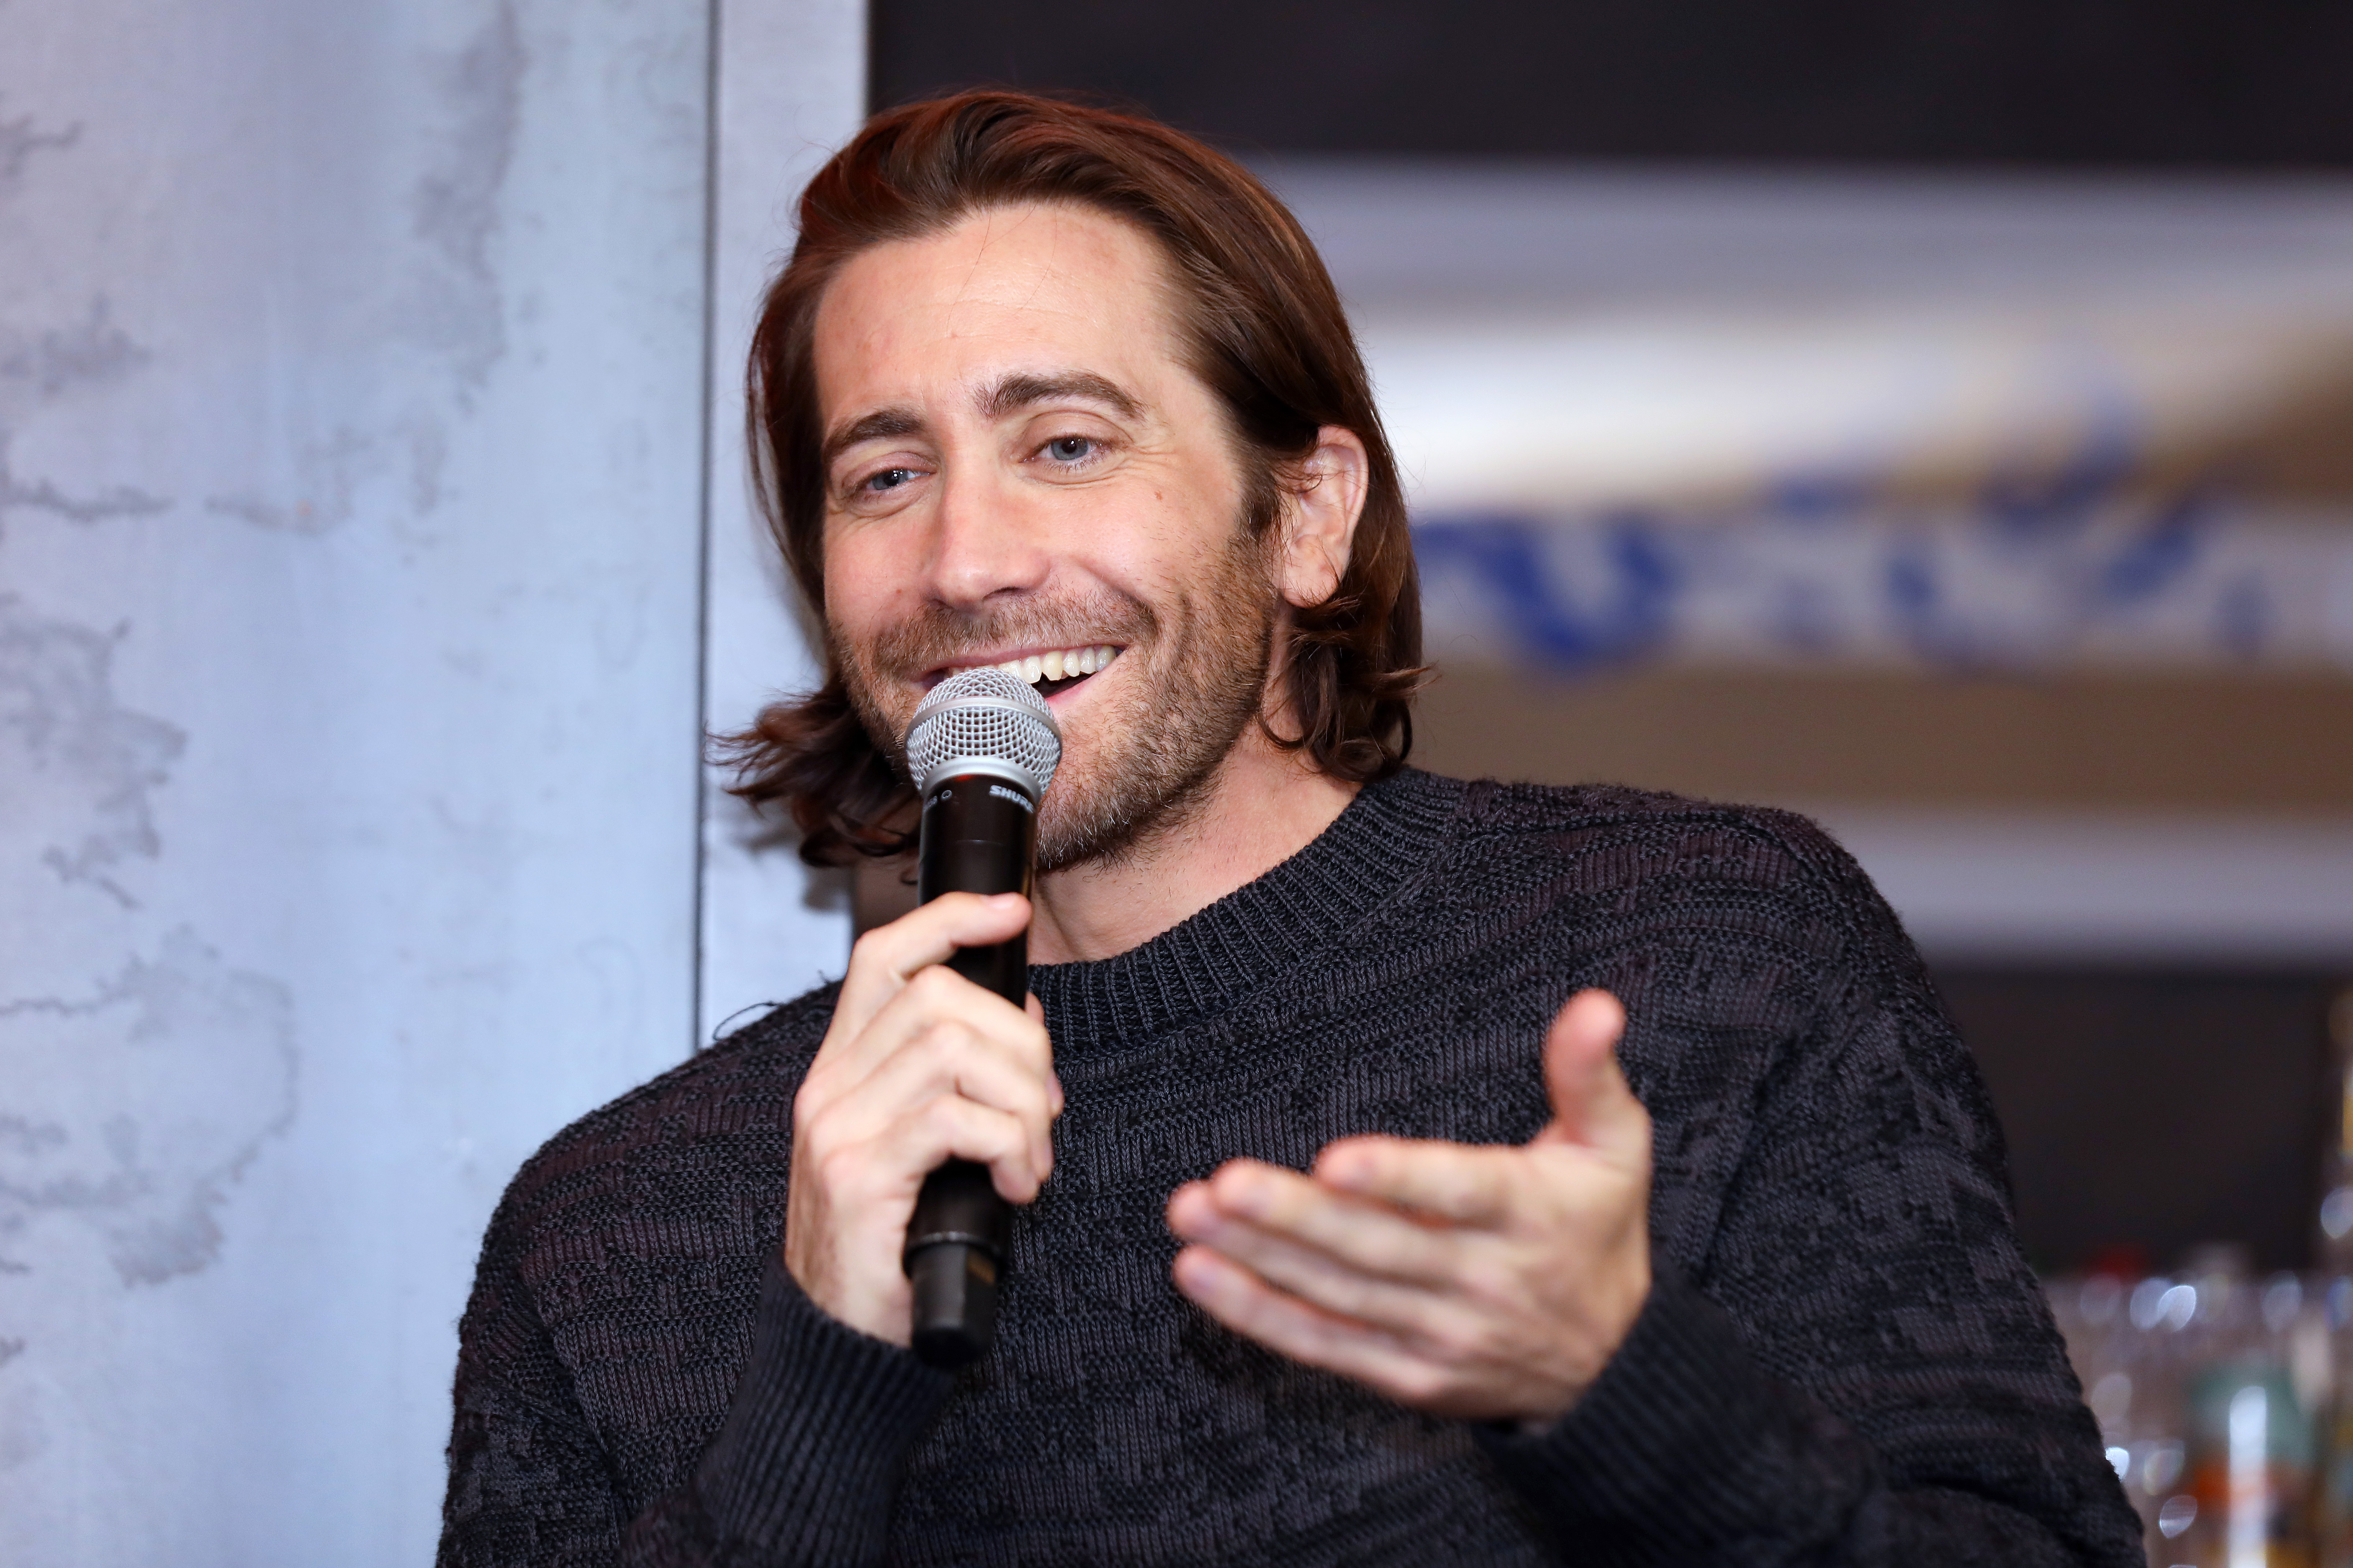 Jake Gyllenhaal Admits He Doesn’t Bathe Regularly: “I Find It Less Necessary”